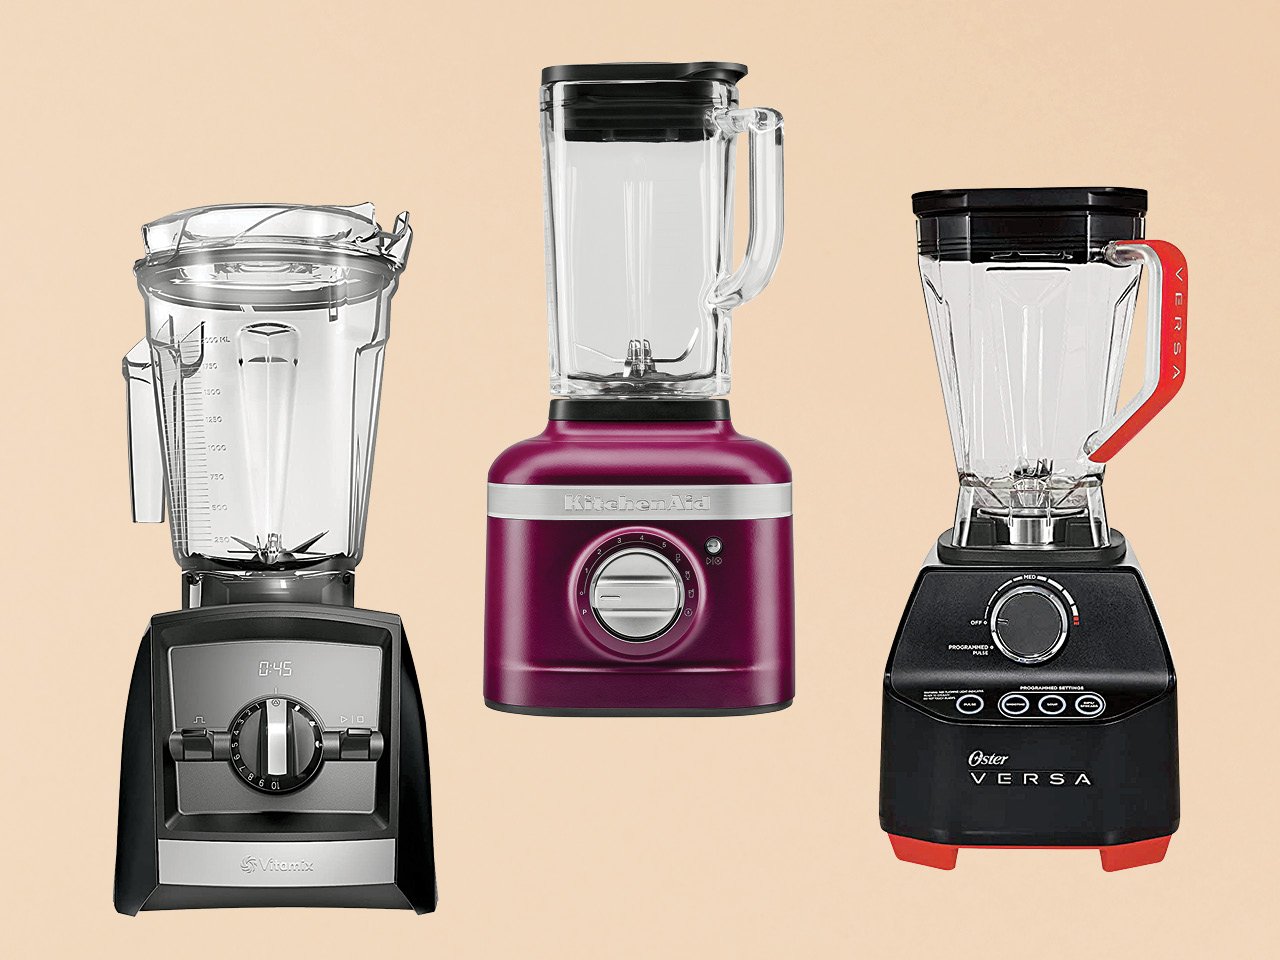 Three powerful blenders that can be used to follow nut milk recipes at home